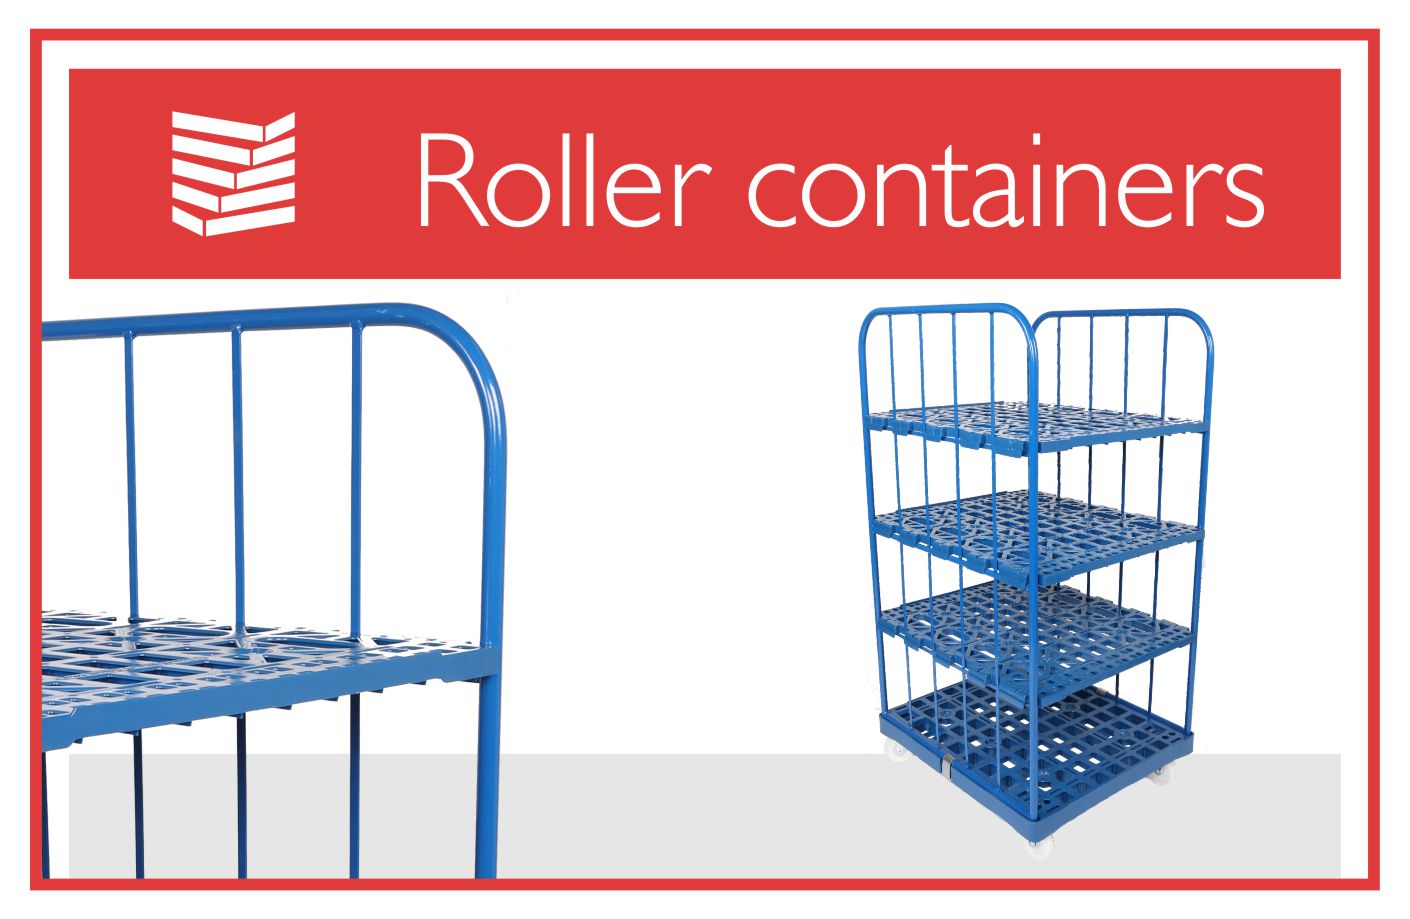 Roller containers